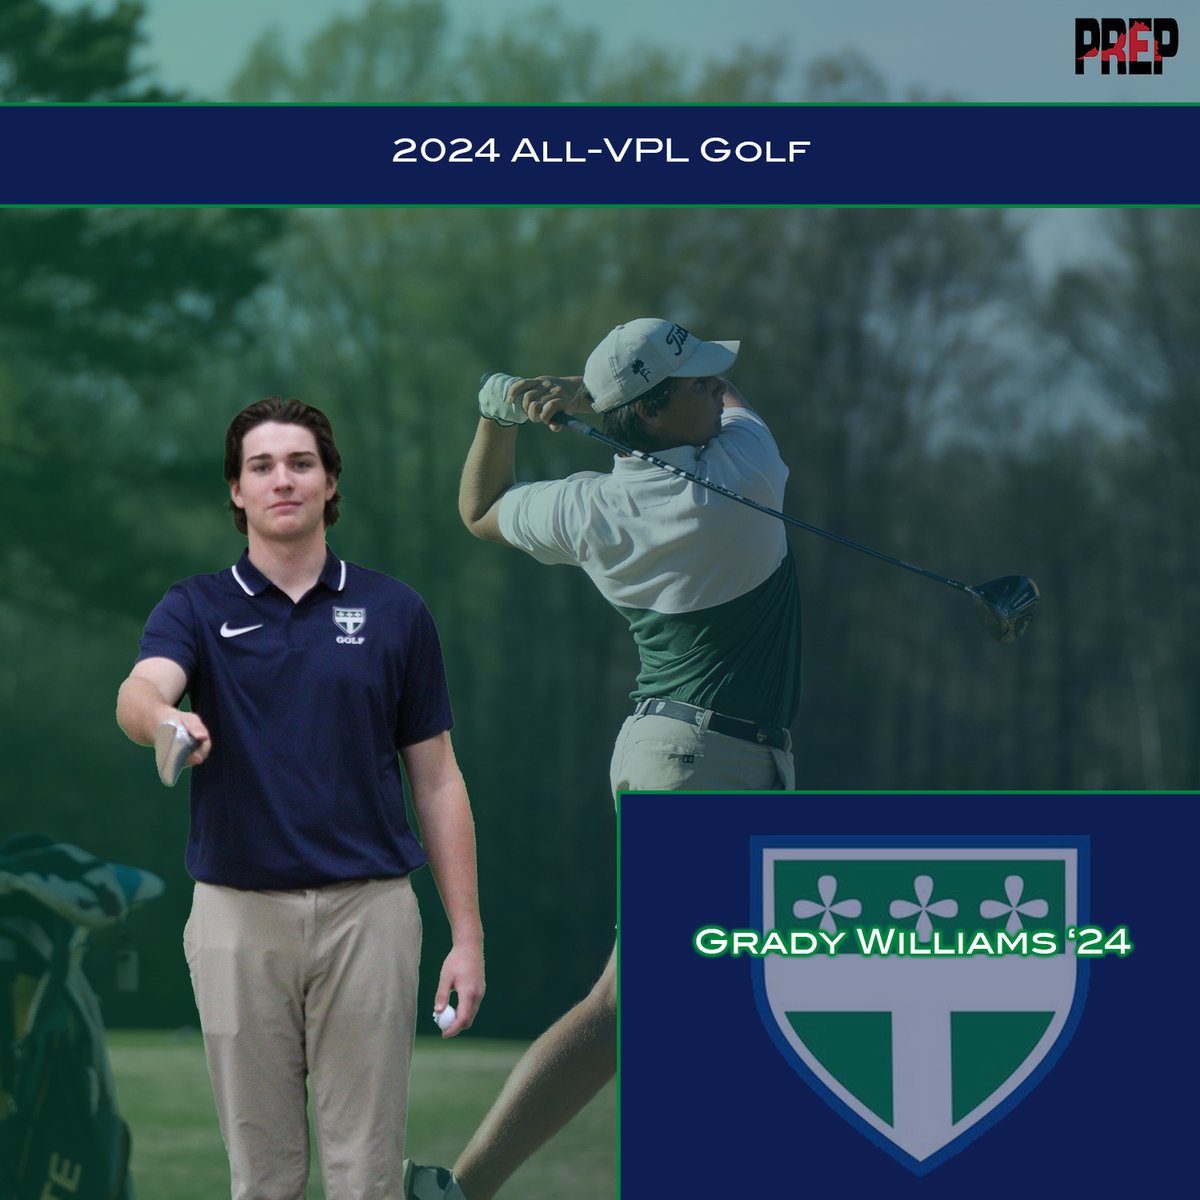 Congratulations to Grady Williams '24 for earning his spot on All-VPL for his performance at the championships! Titan nation is proud of you!